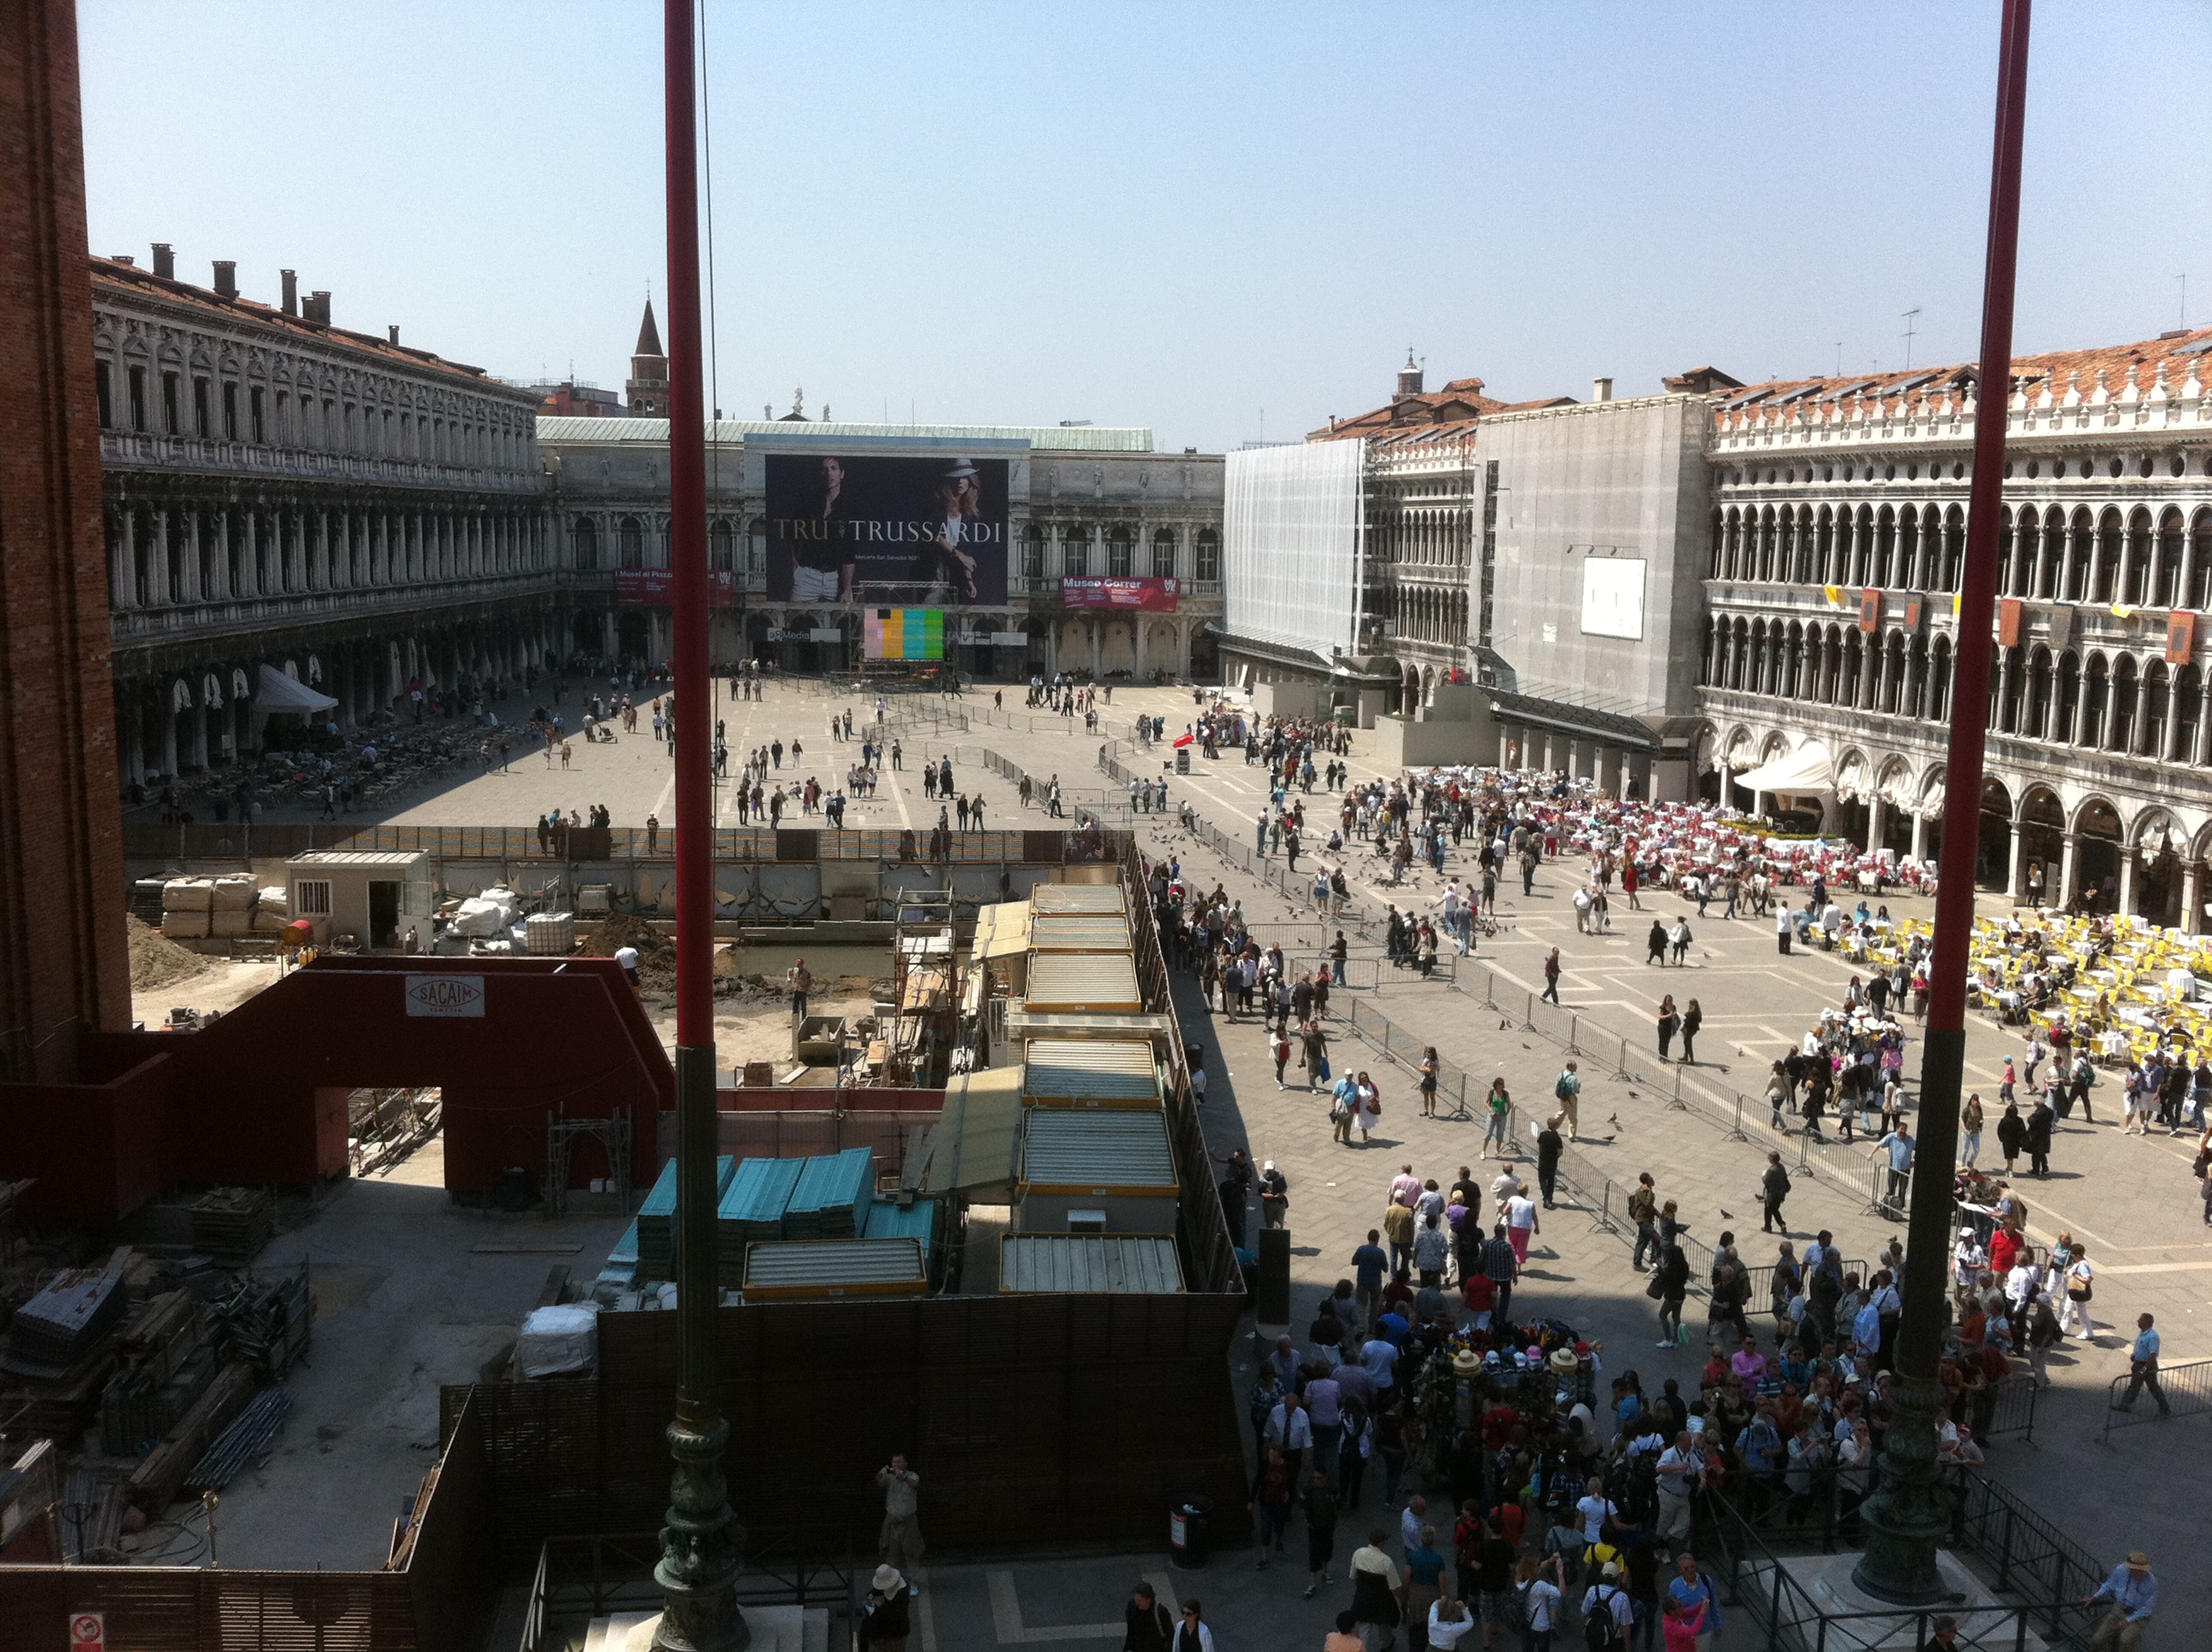 Piazzo San Marco from the Basilica; preparations already underway for a papal visit